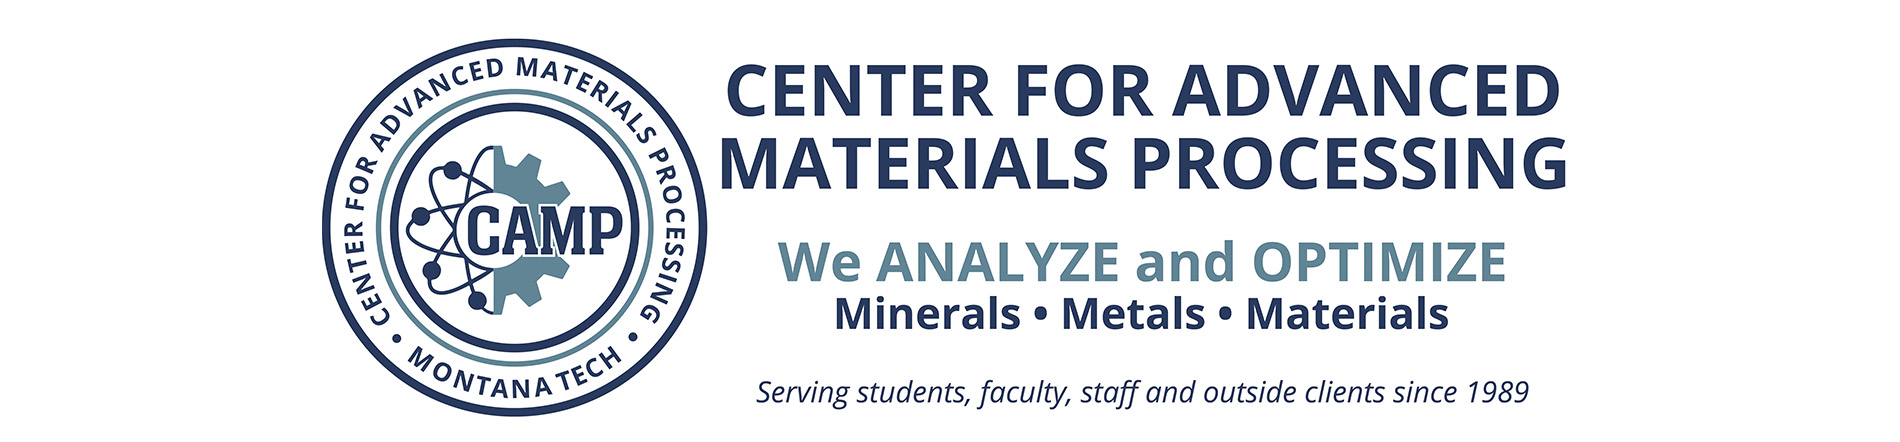 Research - Center for Advanced Mineral and Metallurgical Processing (CAMP)